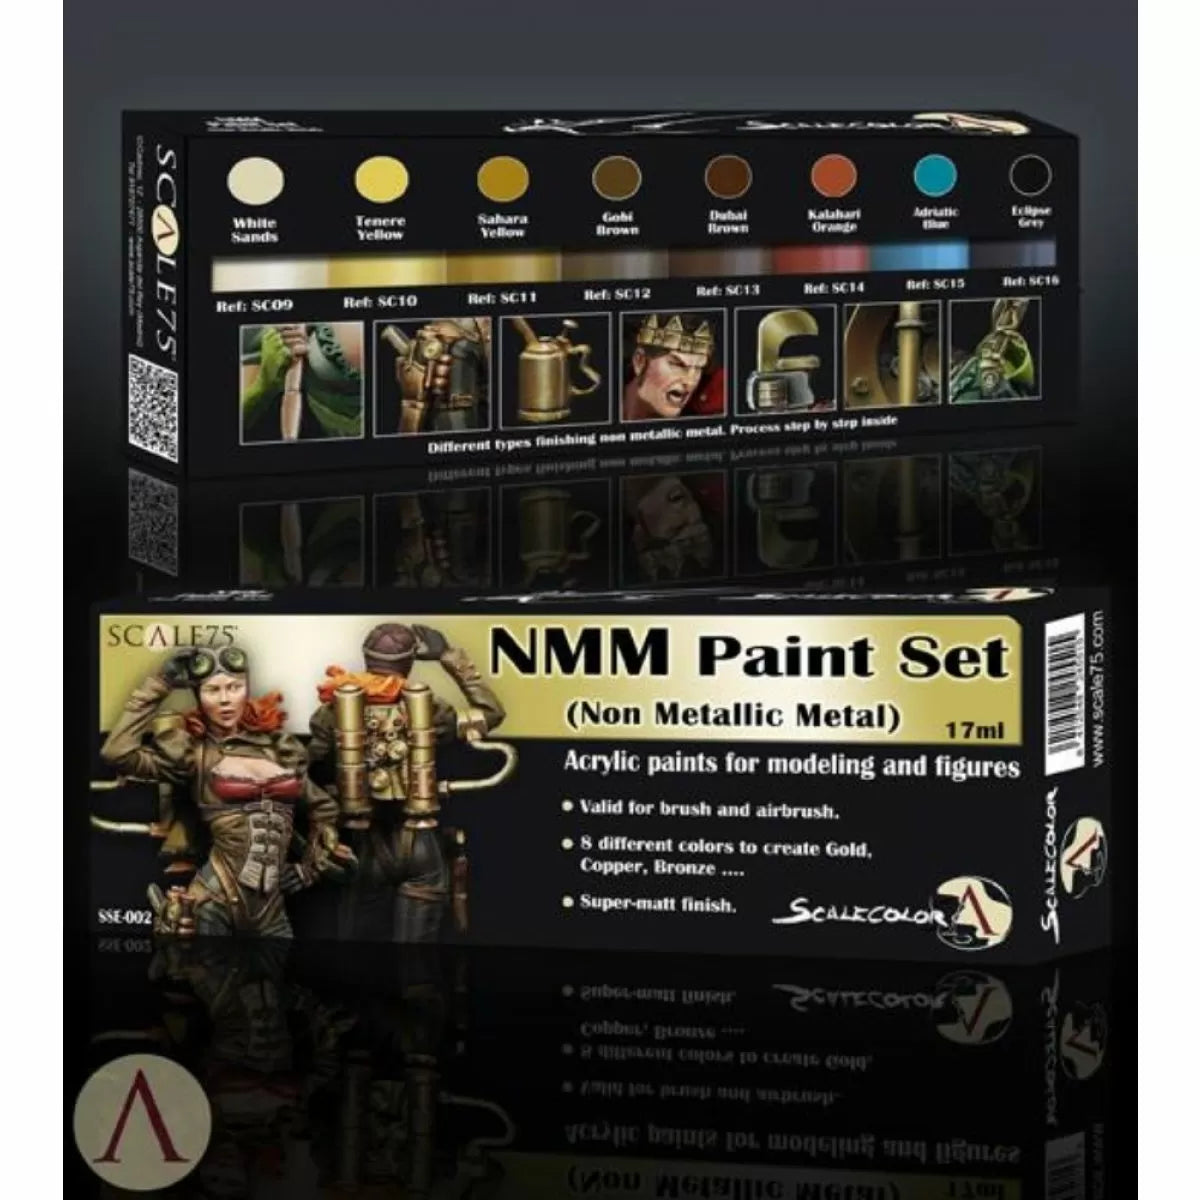 SCALE 75 SCALECOLOR NMM GOLD AND COPPER PAINT SET